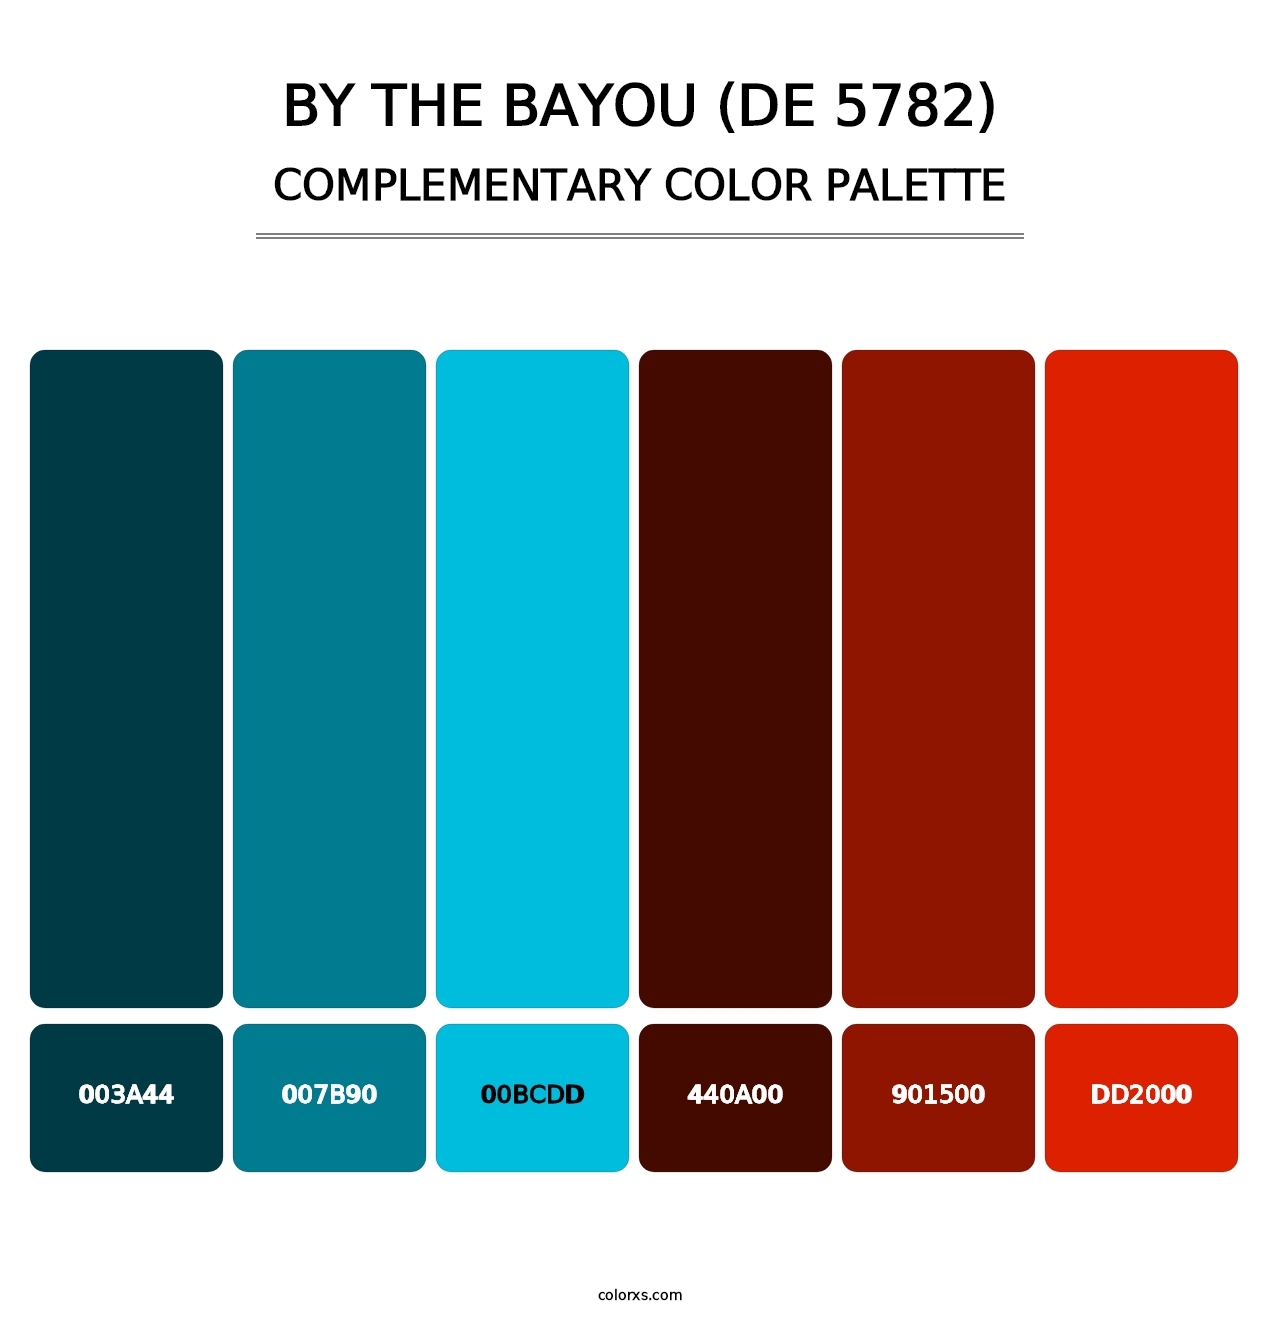 By the Bayou (DE 5782) - Complementary Color Palette